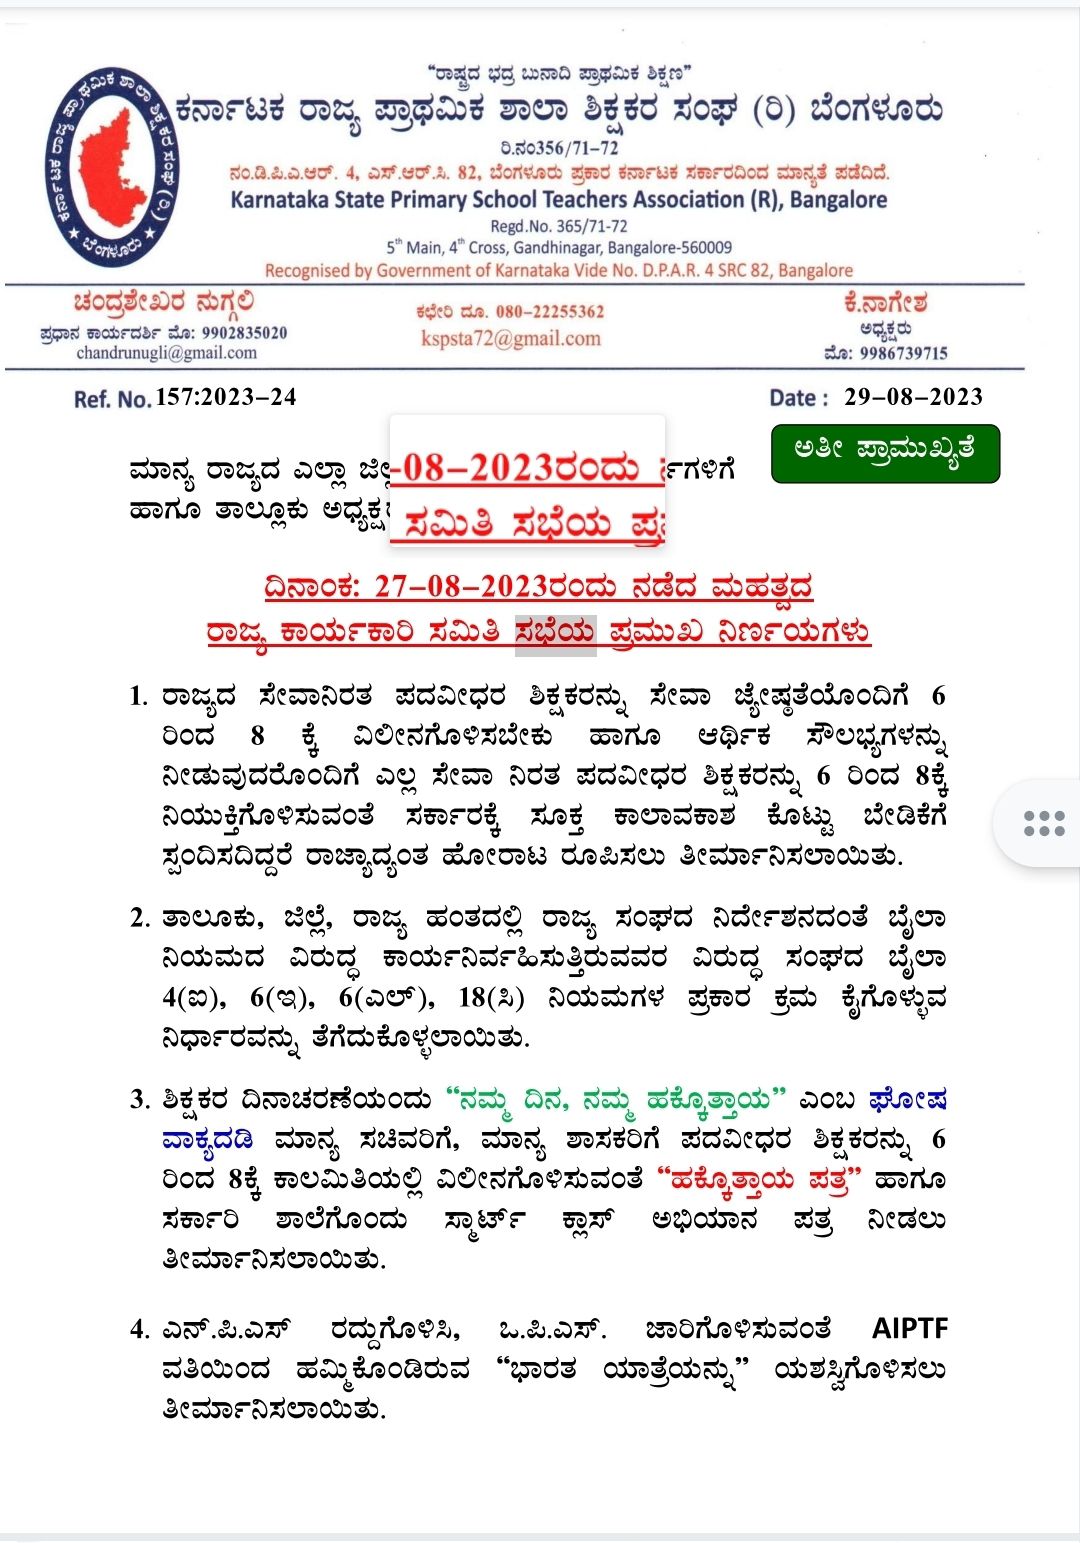 Conclusions of the Karnataka State Primary School Teachers' Association State Executive Committee Meetin